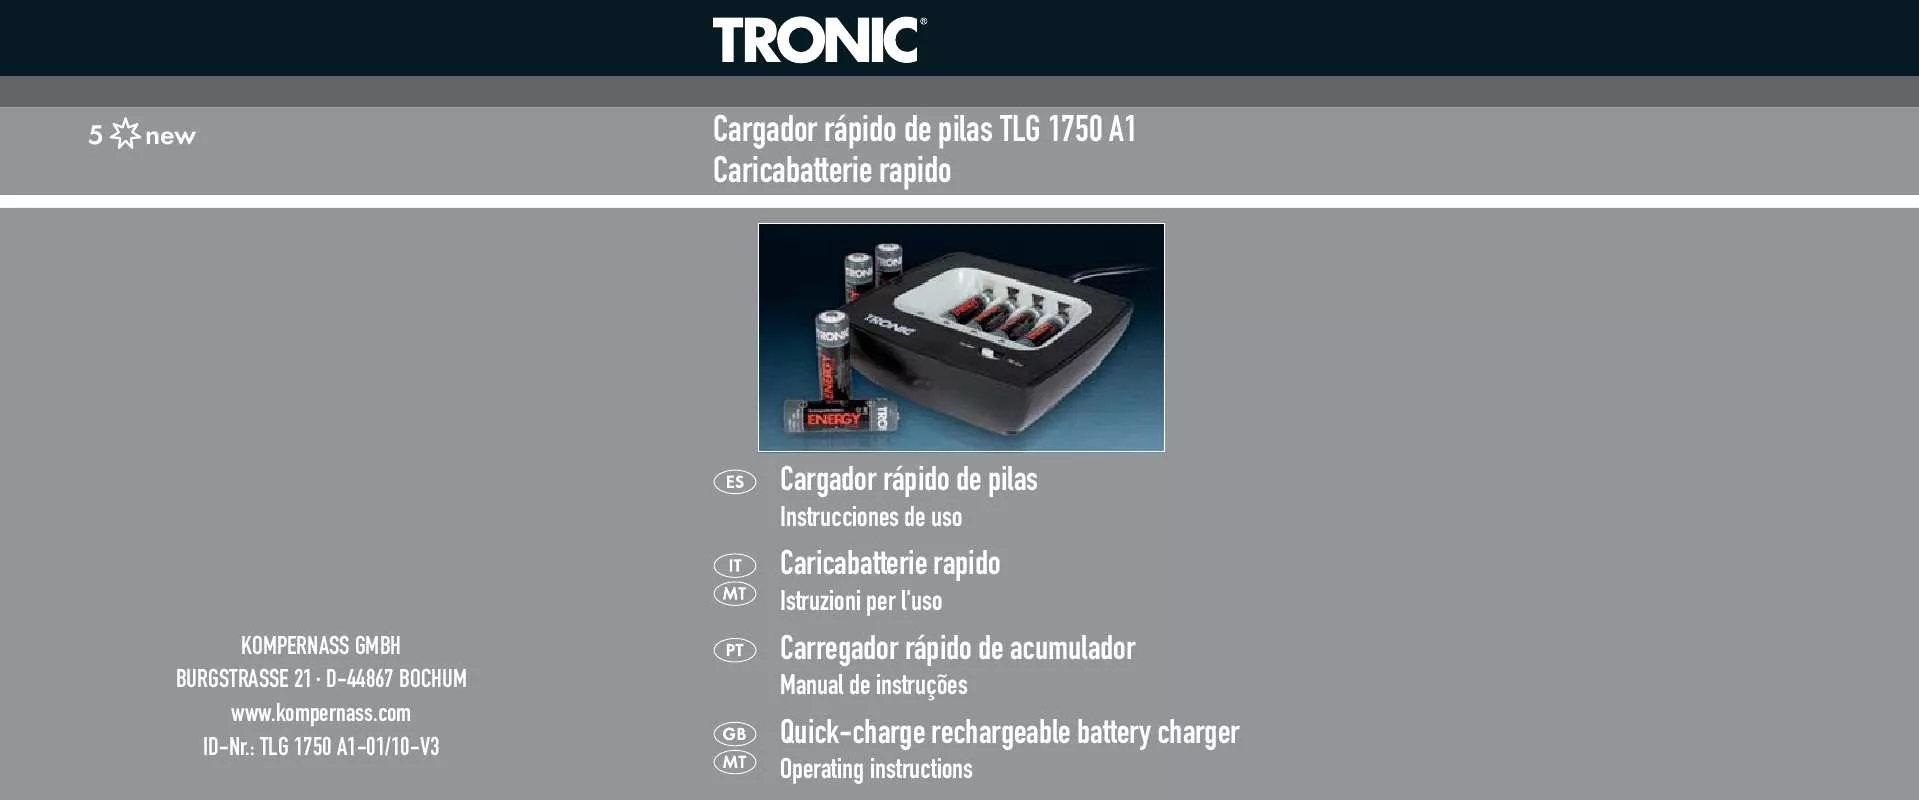 Mode d'emploi TRONIC TLG 1750 A1 QUICK-CHARGE RECHARGEABLE BATTERY CHARGER